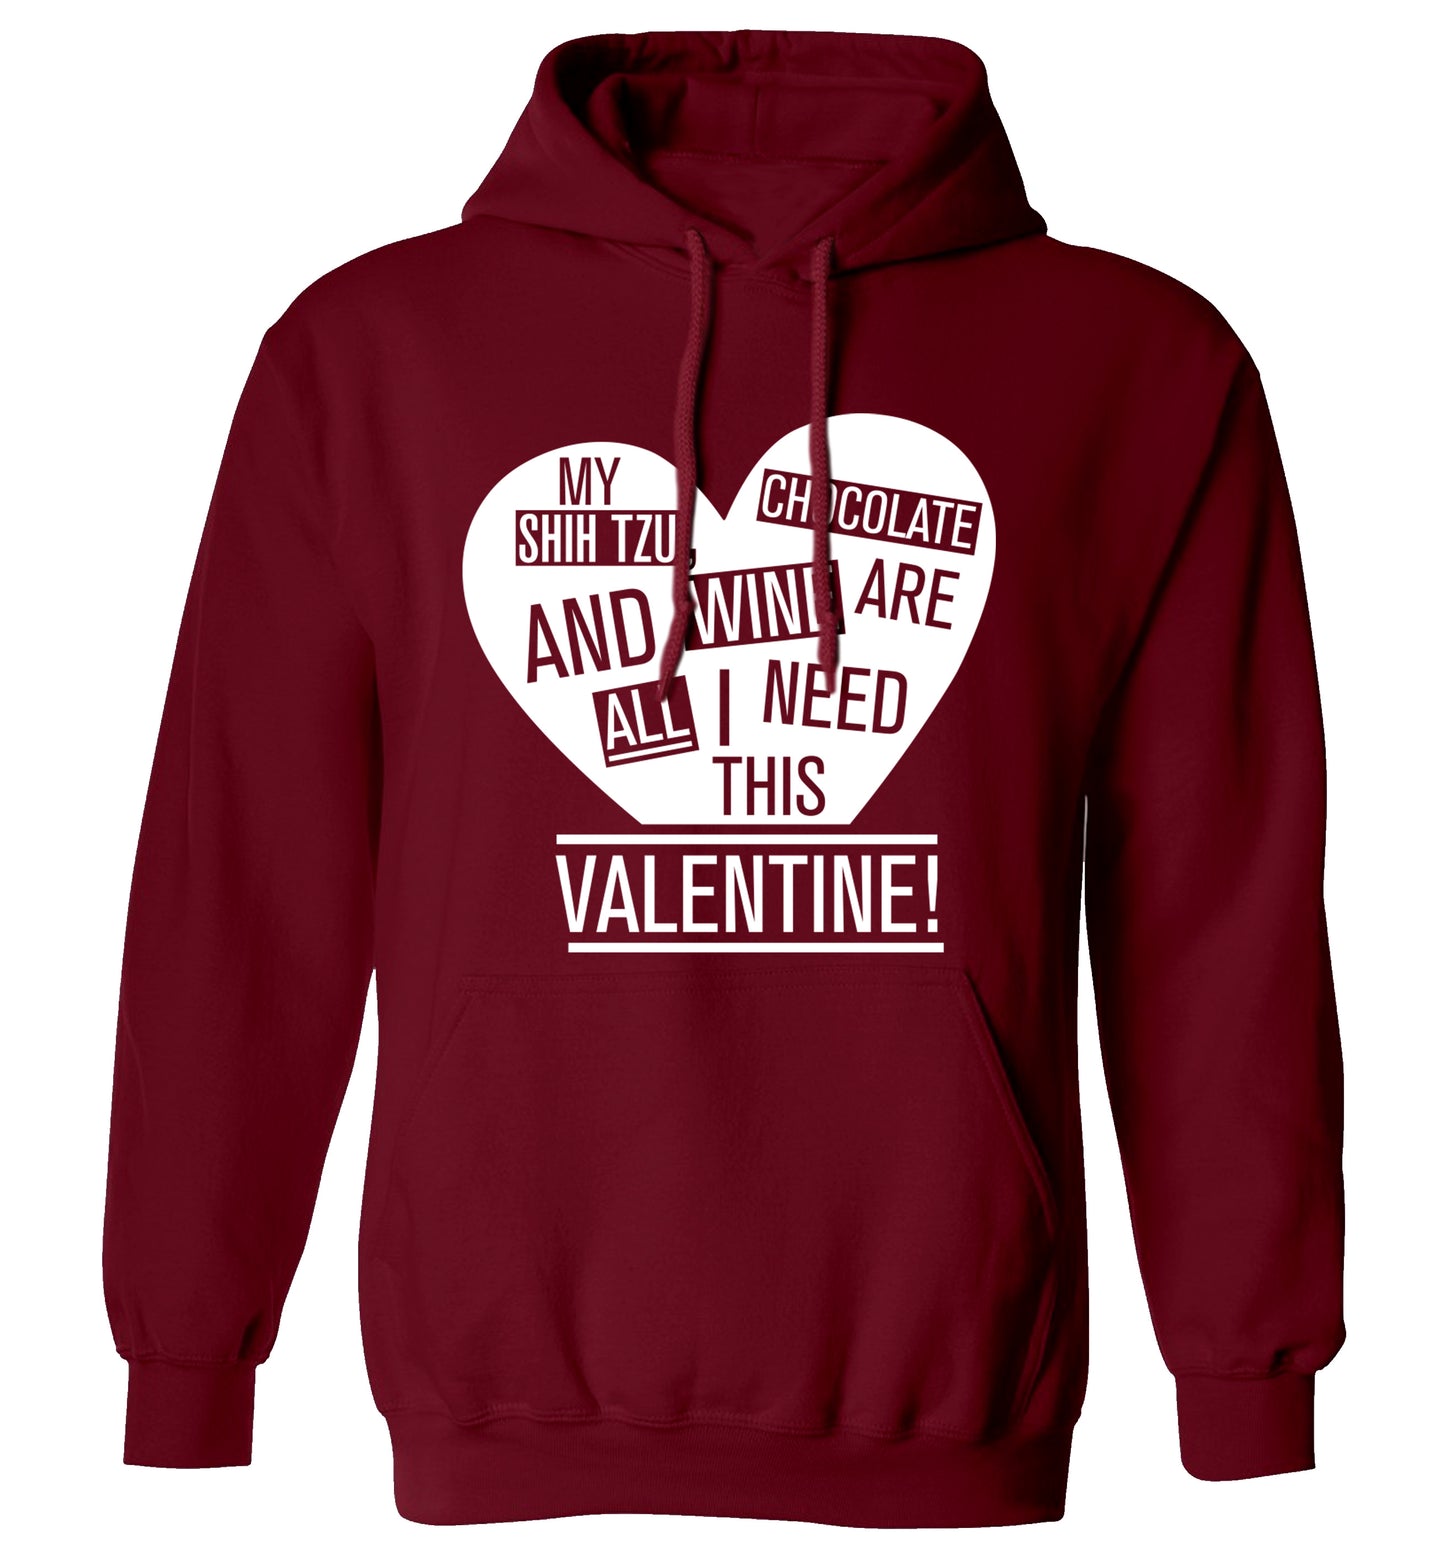 My shih tzu, chocolate and wine are all I need this valentine! adults unisex maroon hoodie 2XL